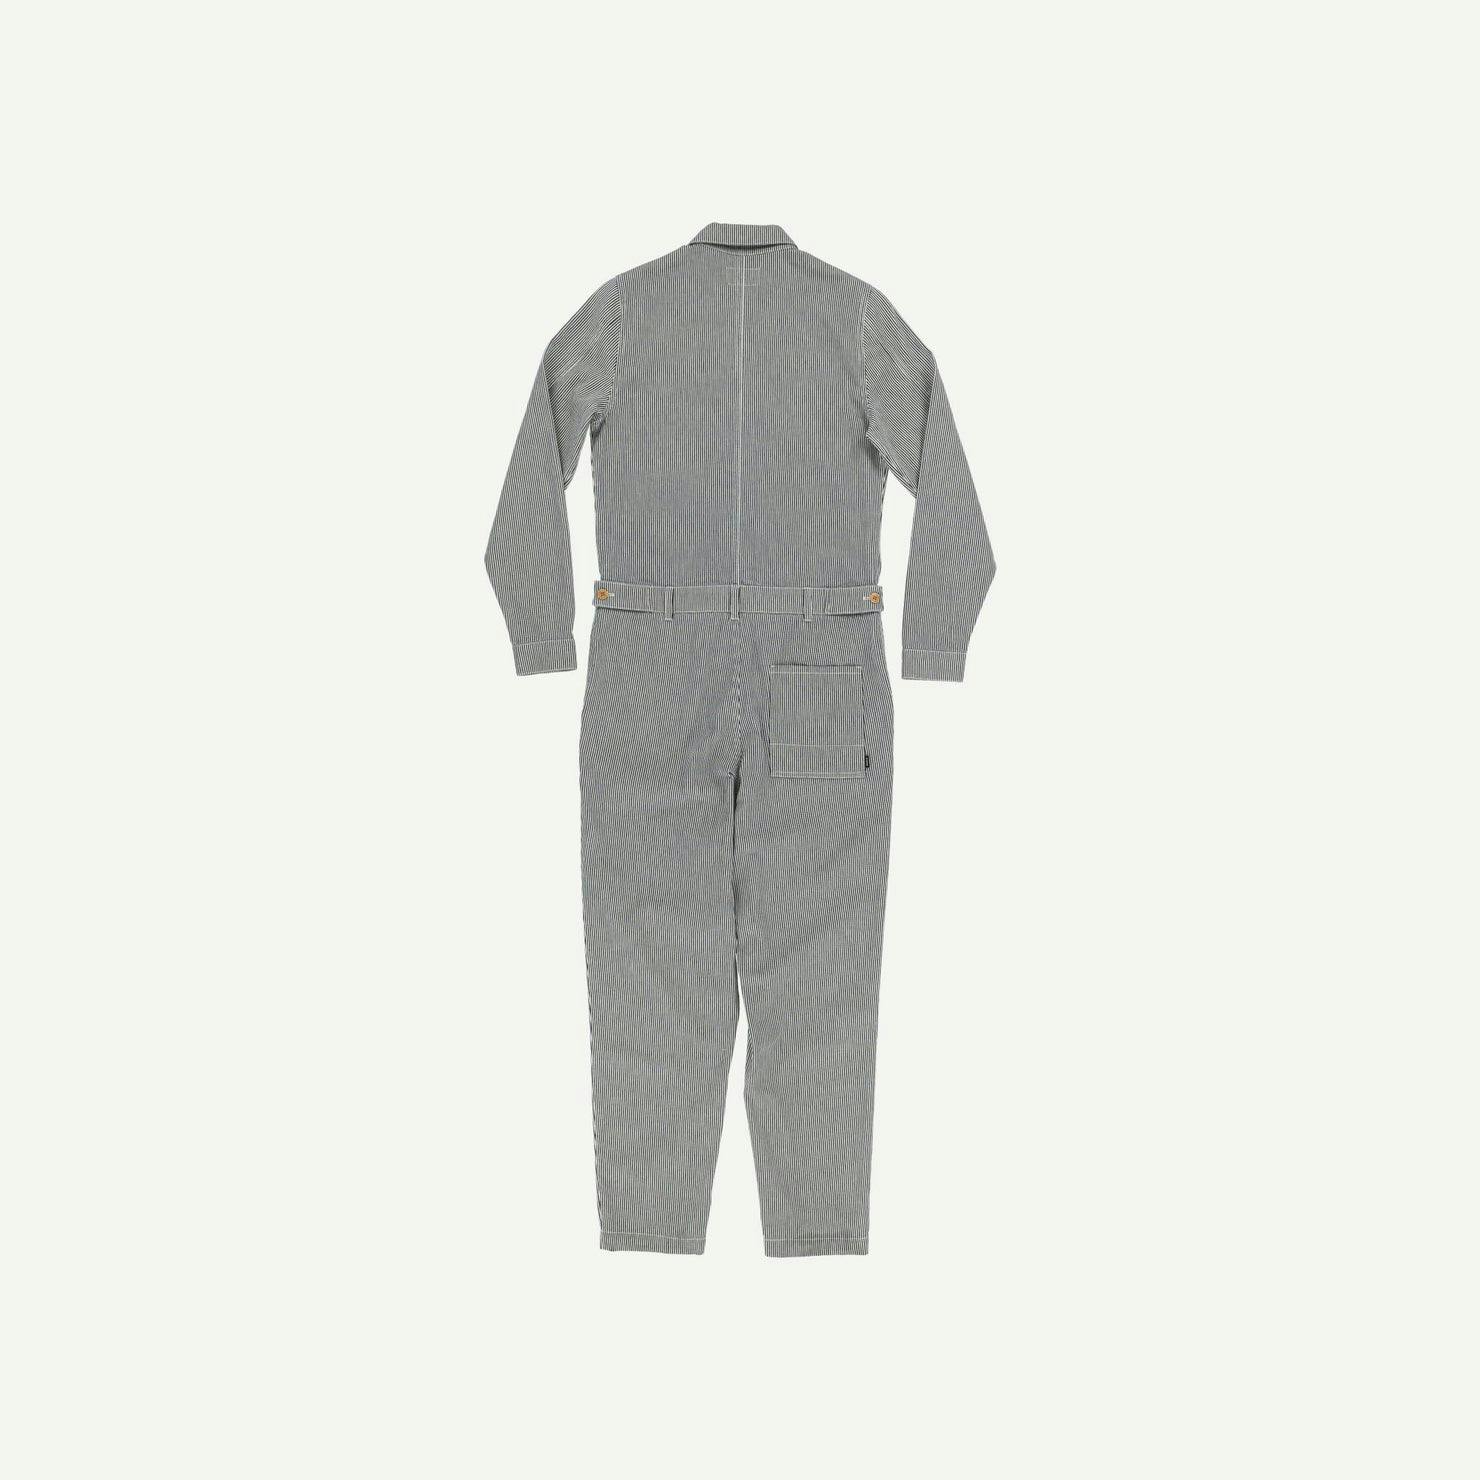 Finisterre Brand new Grey Jumpsuit